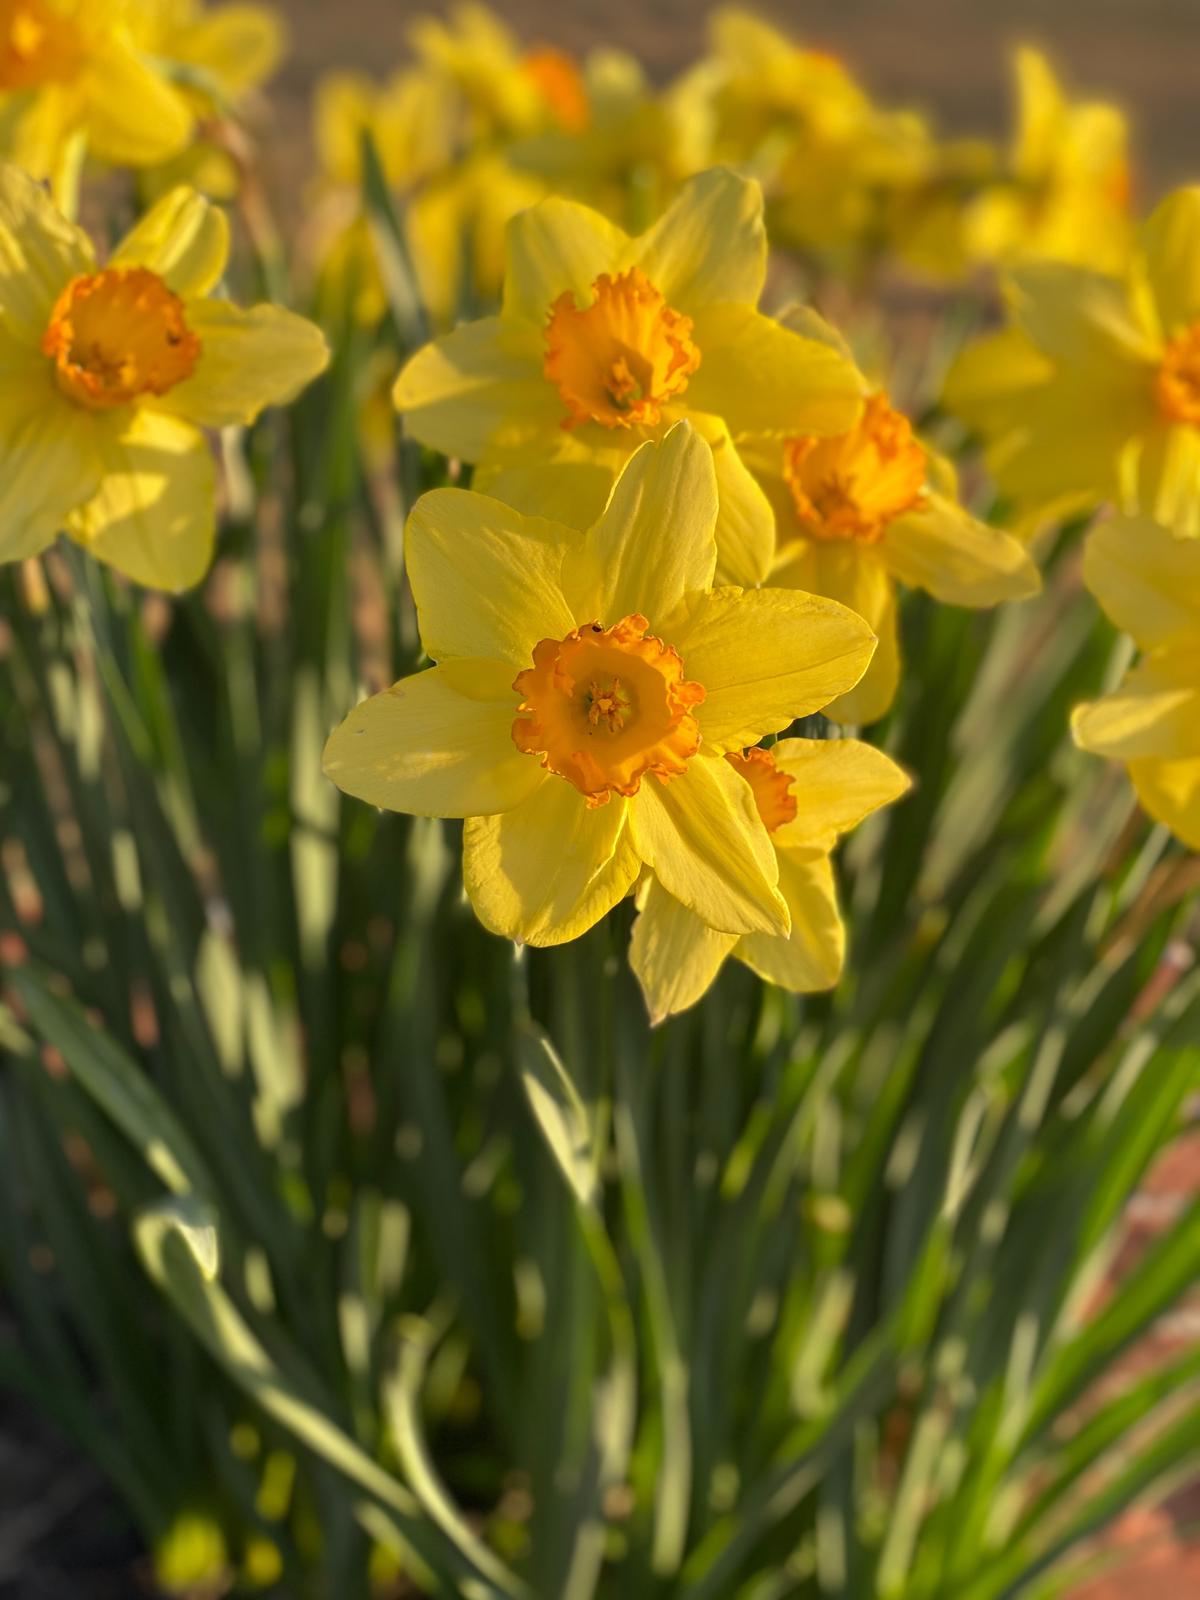 A vibrant field of daffodils in bloom, radiating bright yellow flowers in a garden setting.